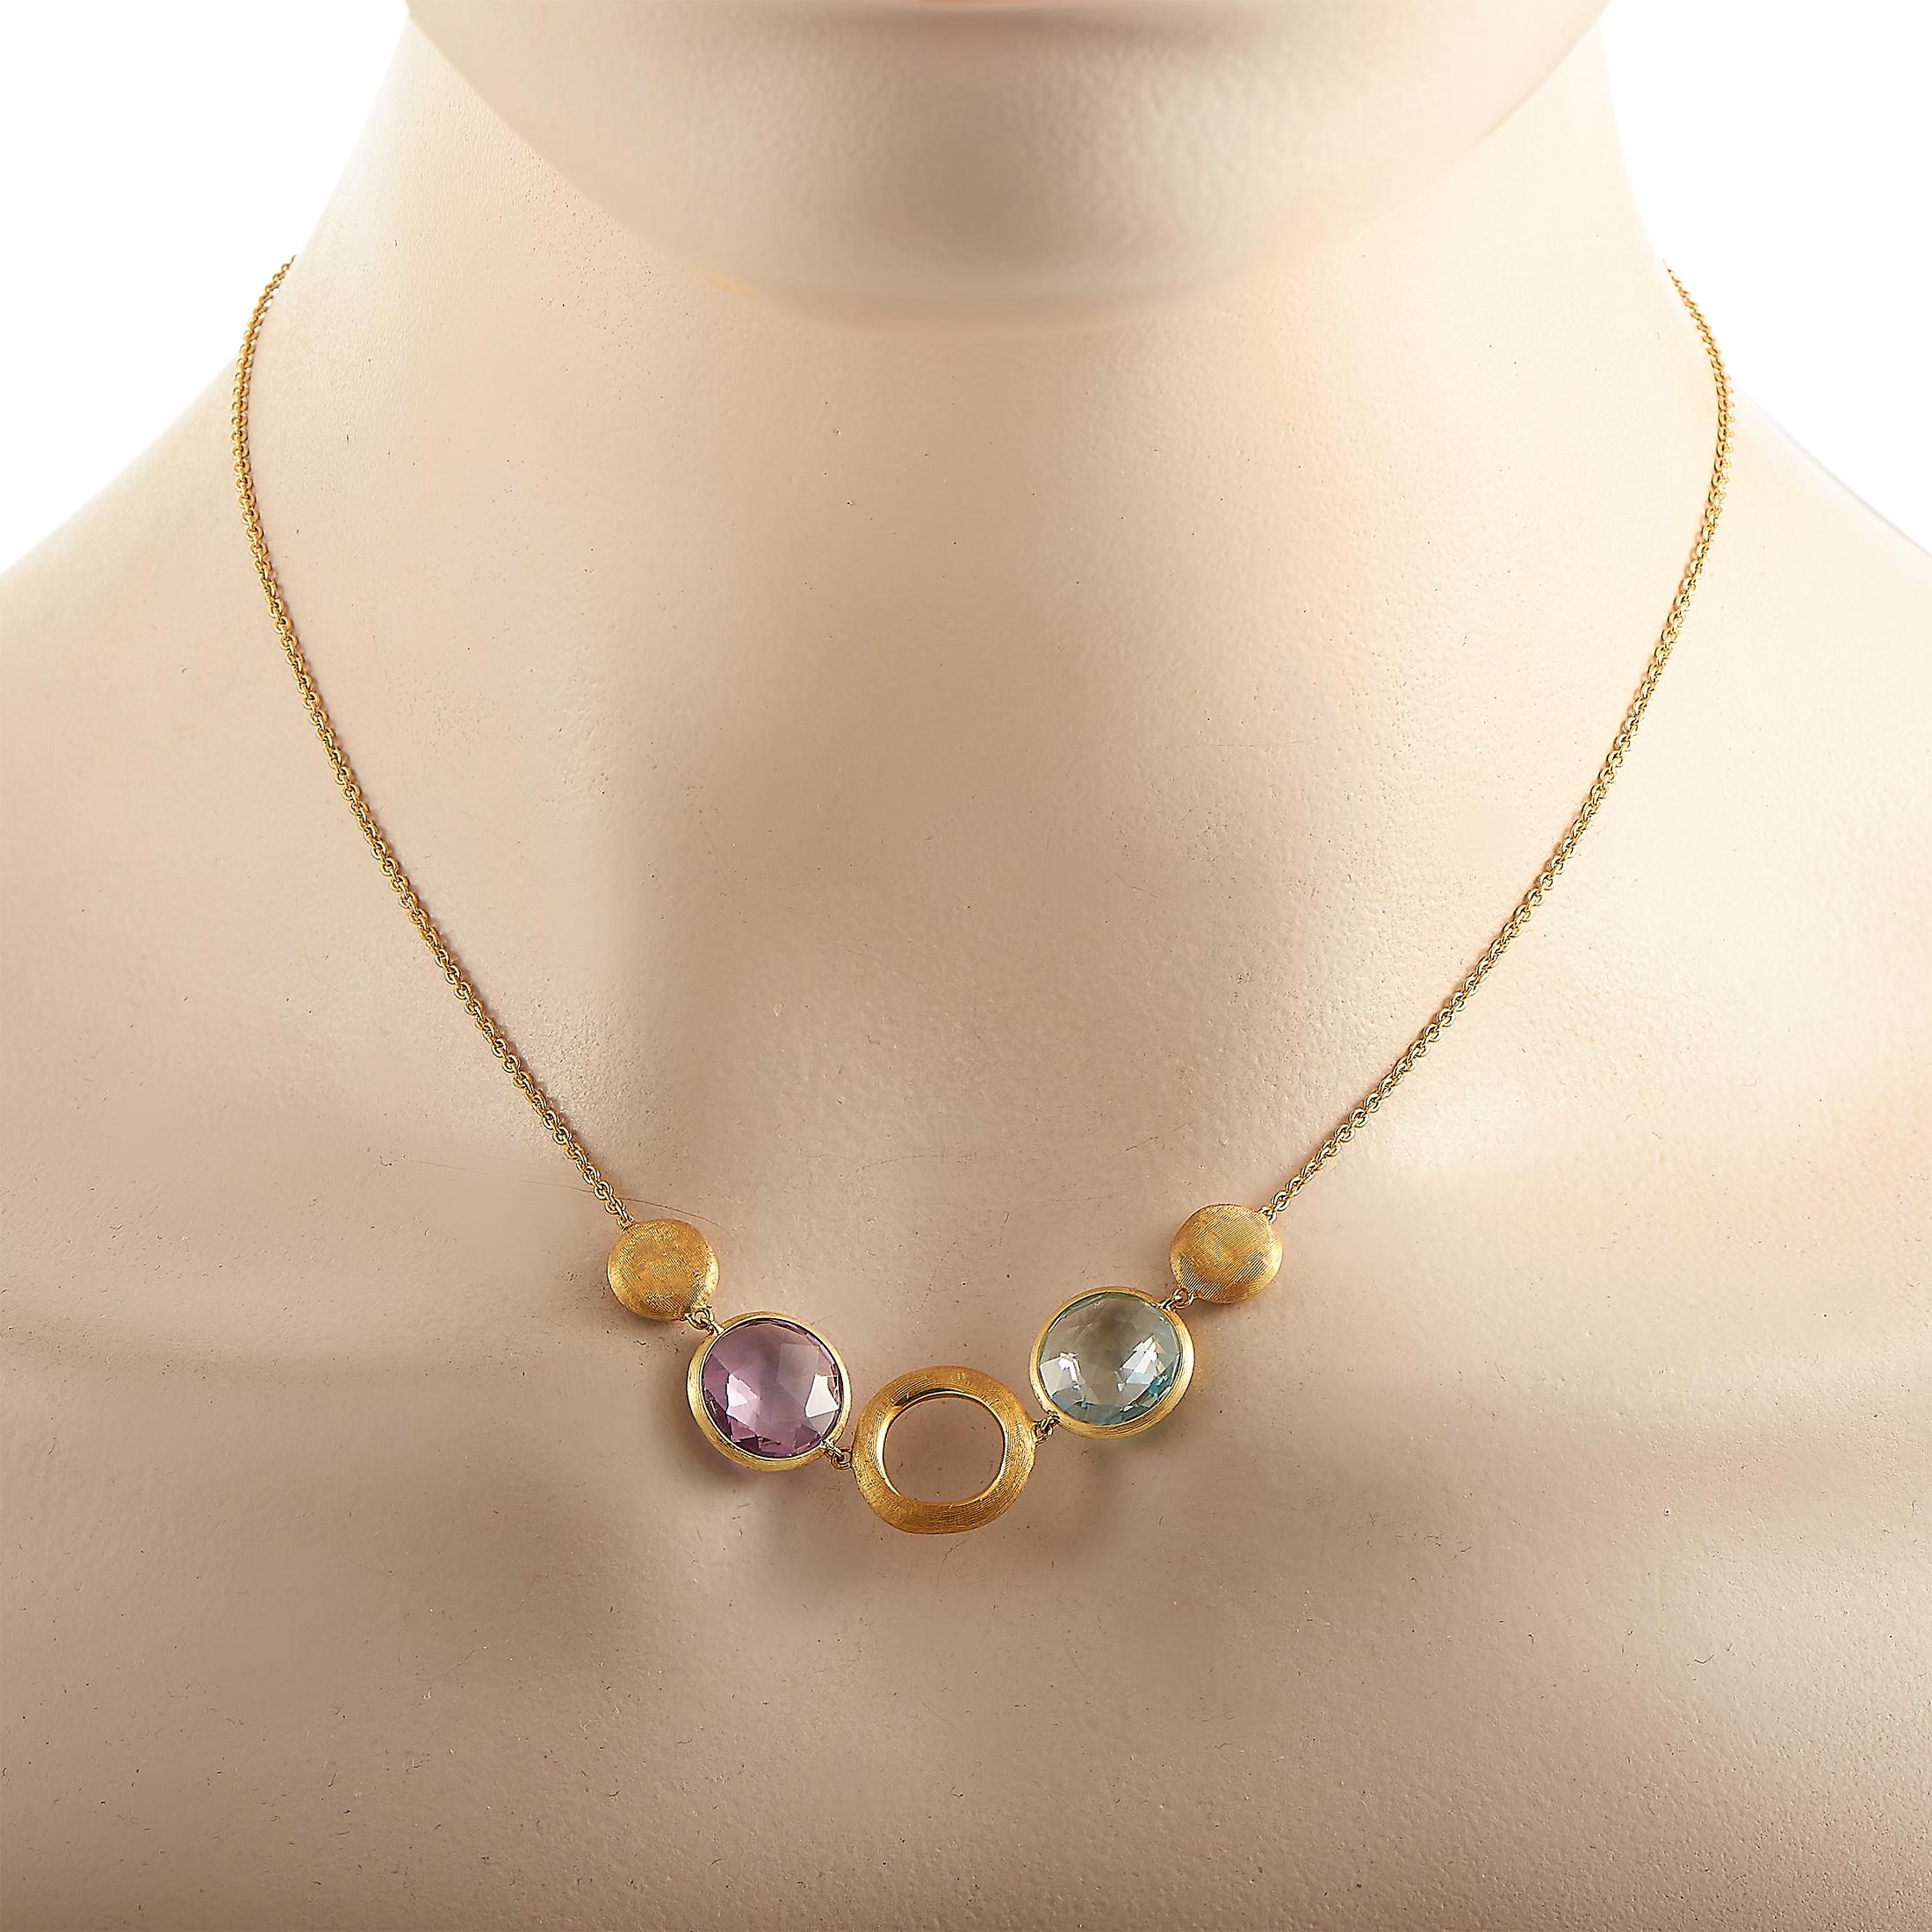 This Marco Bicego necklace is made of 18K yellow gold and embellished with multicolor stones. The necklace weighs 9 grams and measures 16” in length.
 
 Offered in estate condition, this jewelry piece includes a gift box.
